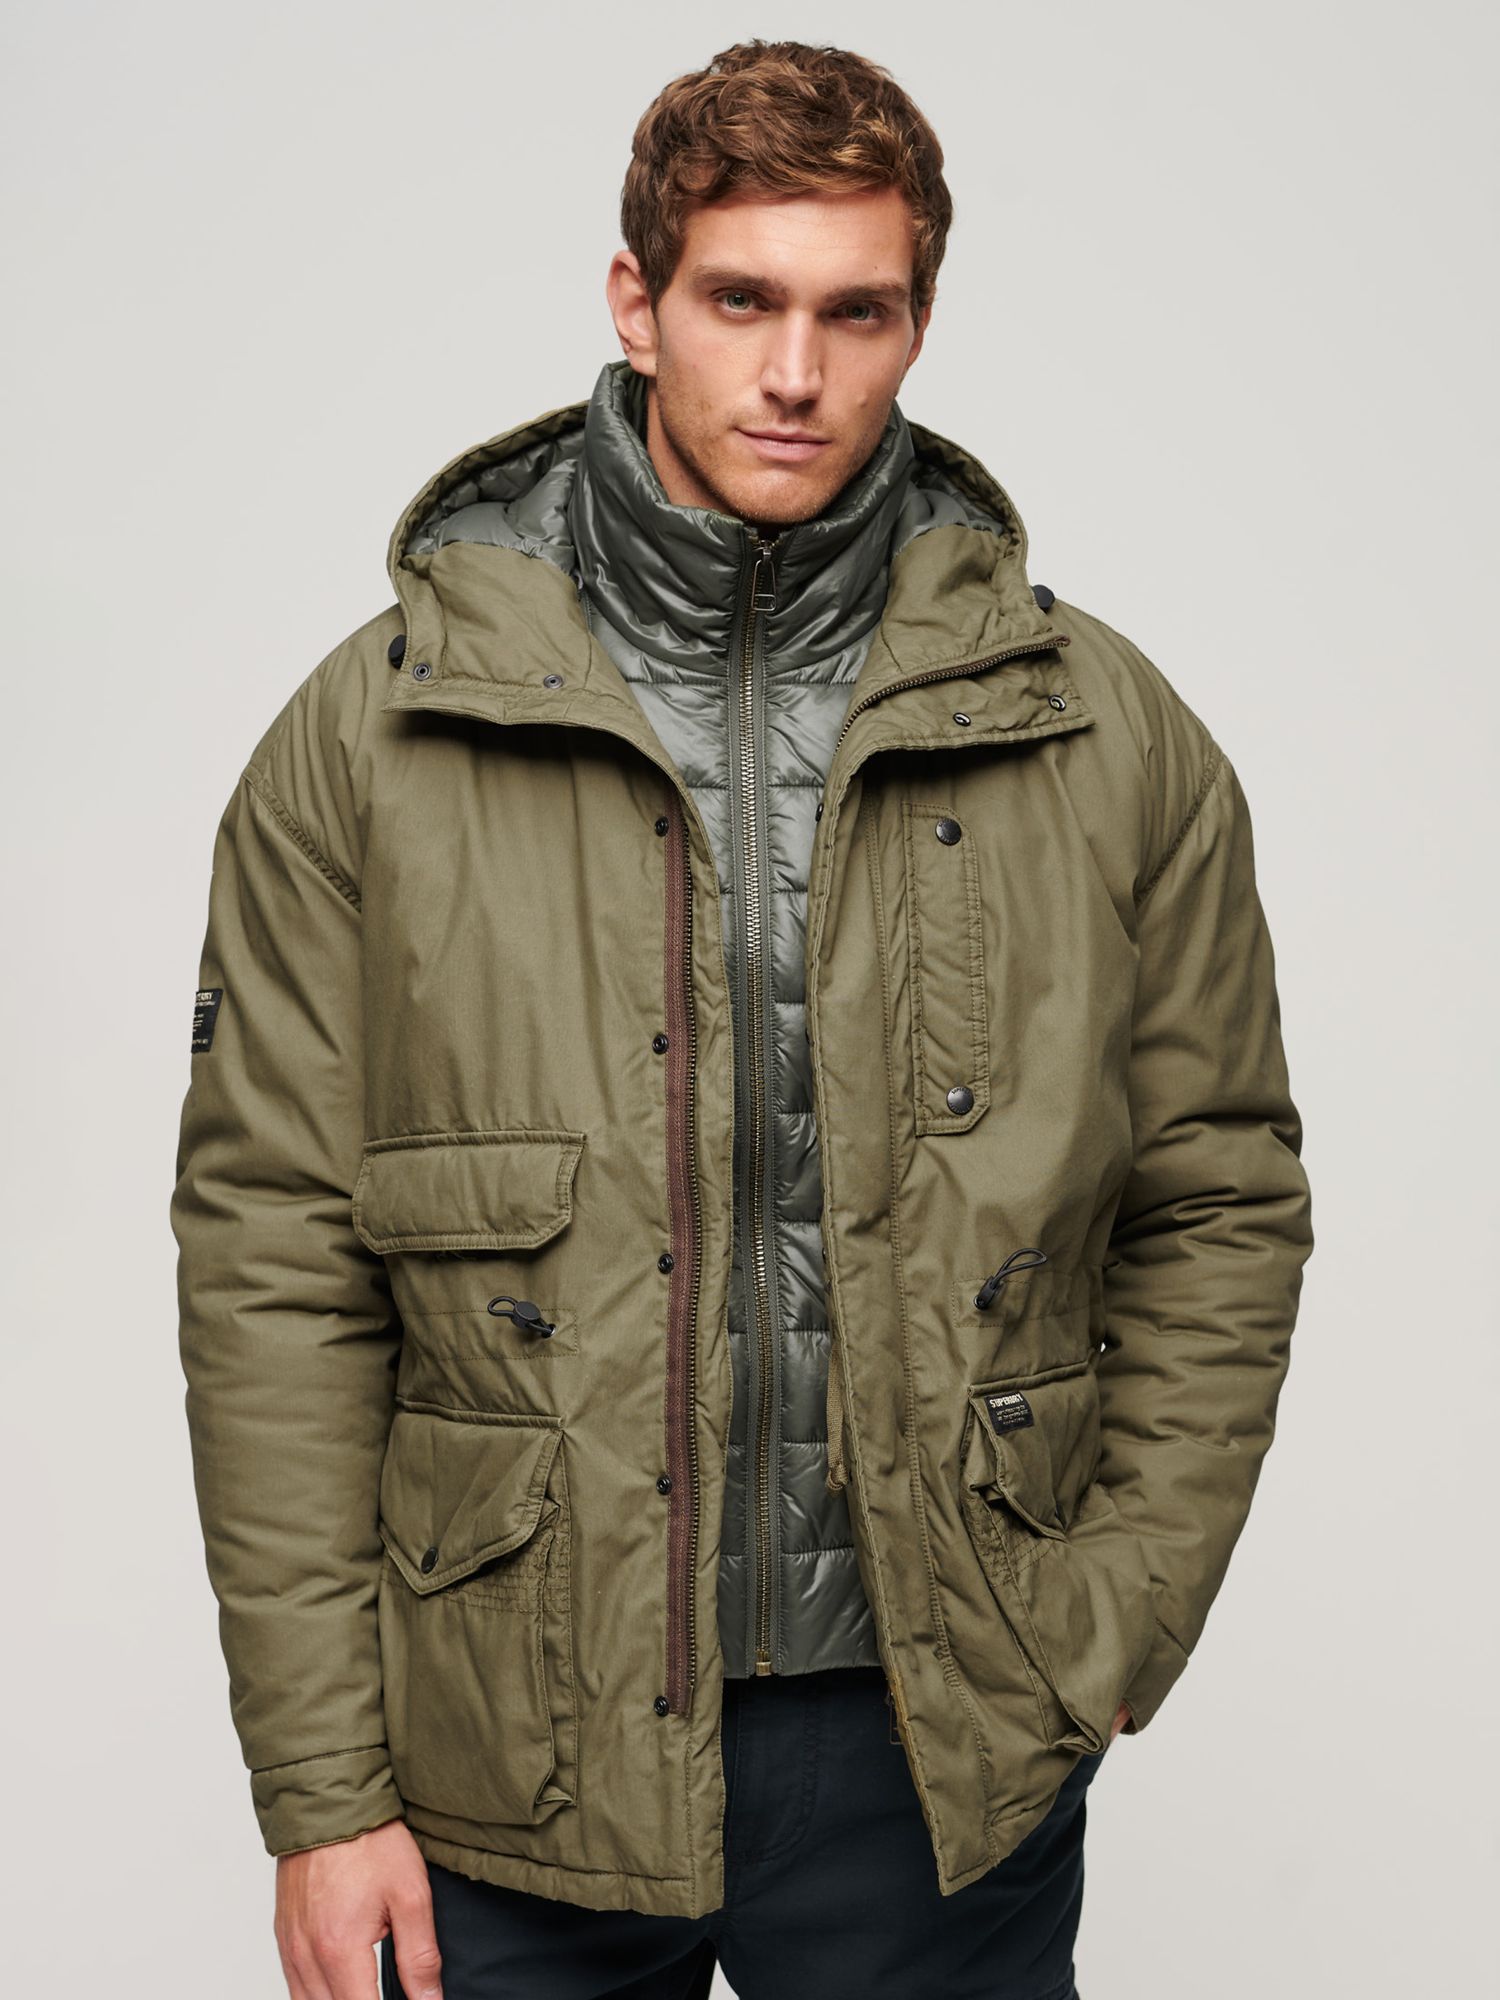 Superdry Hooded Cotton Lined Deck Jacket, Khaki at John Lewis & Partners